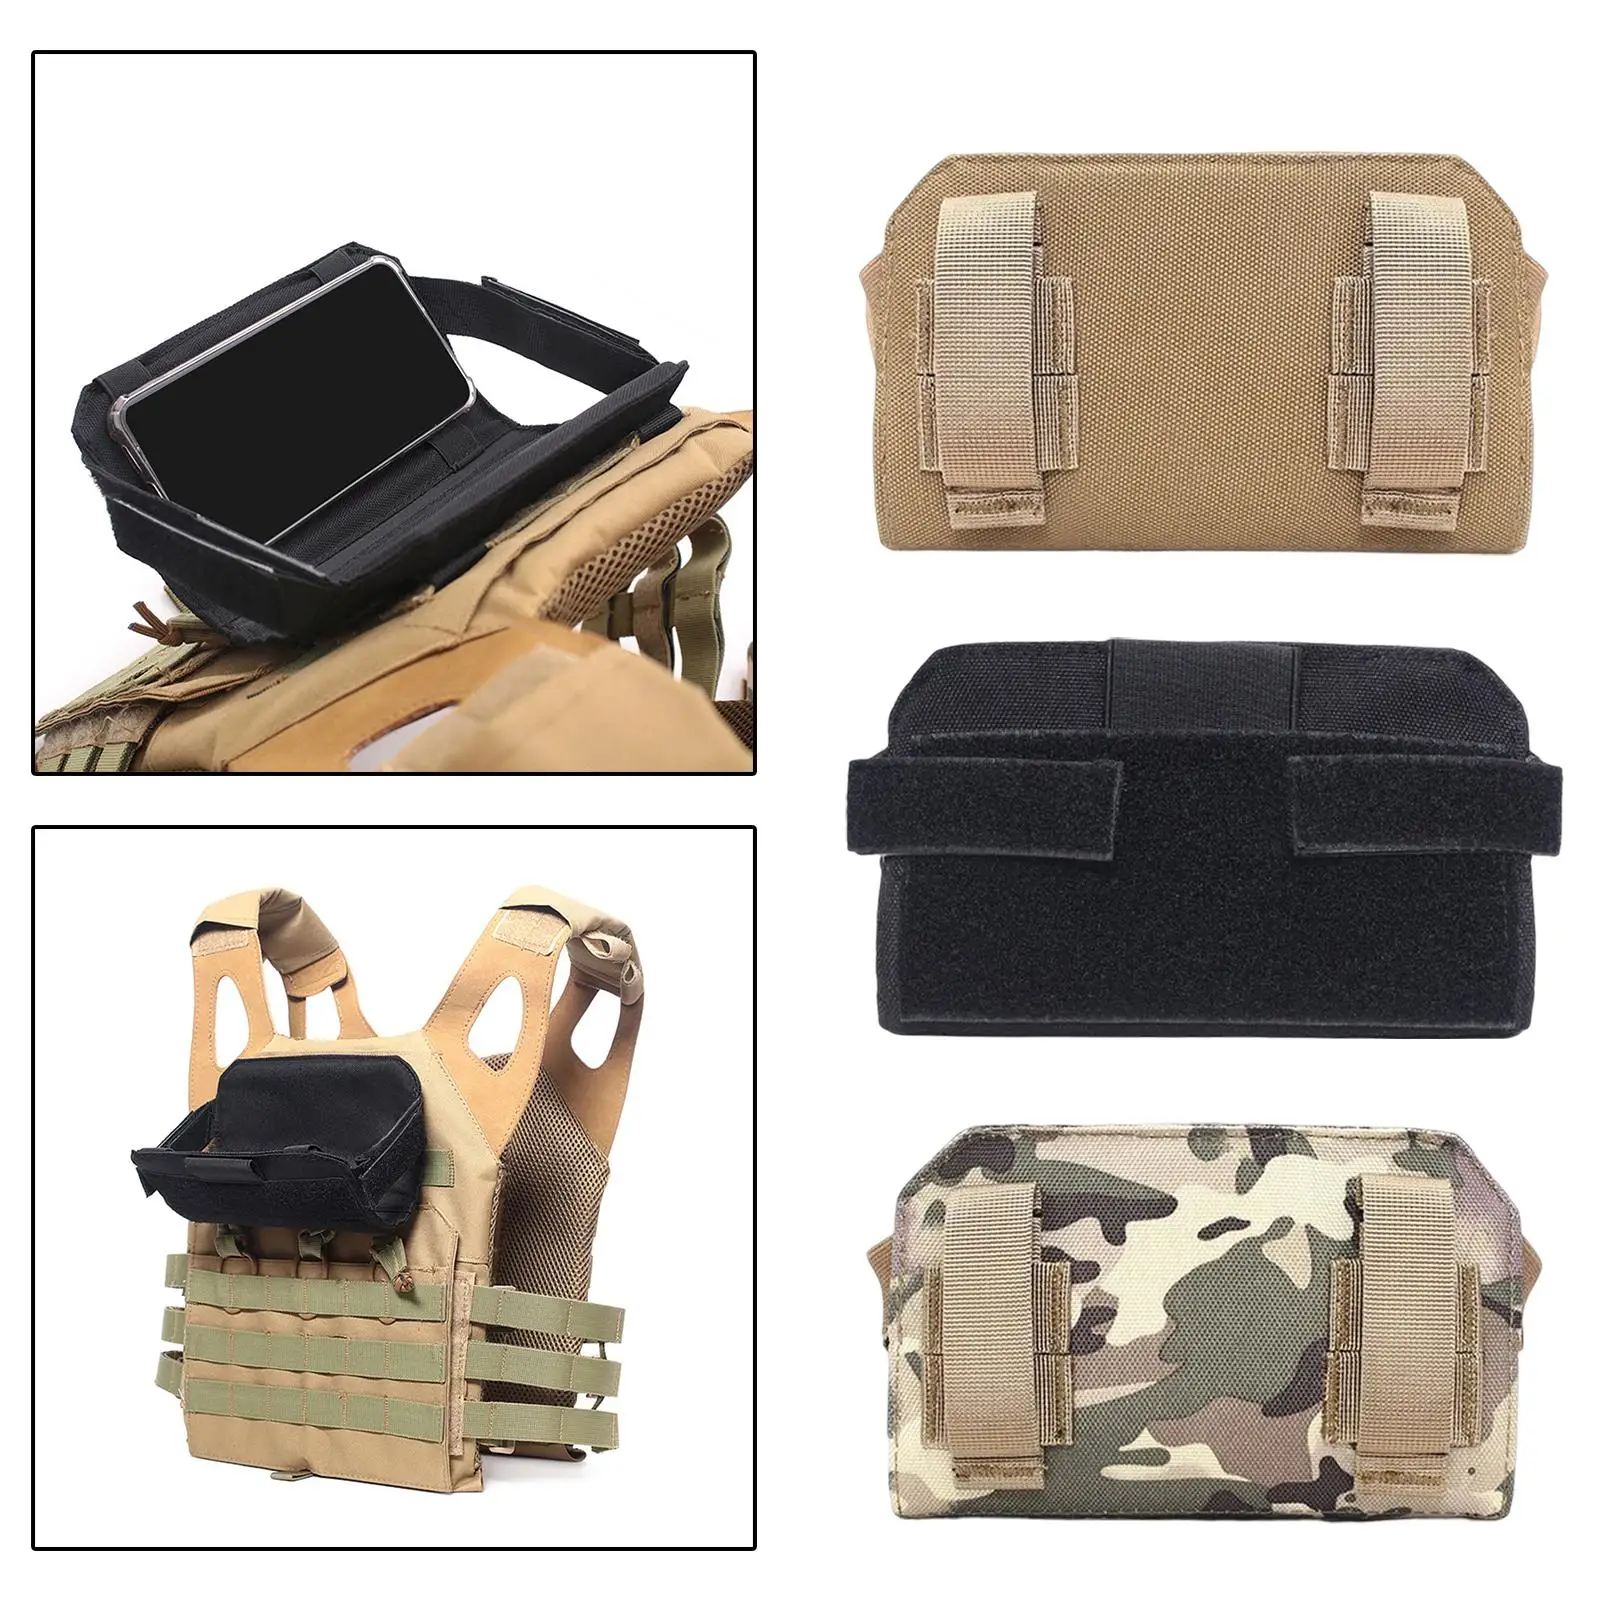 Chest Sundries Bag Map Bag Molle Quick Release Molle Bag Holster Shoulder Strap Pouch Admin Pouch for Hunting Shooting